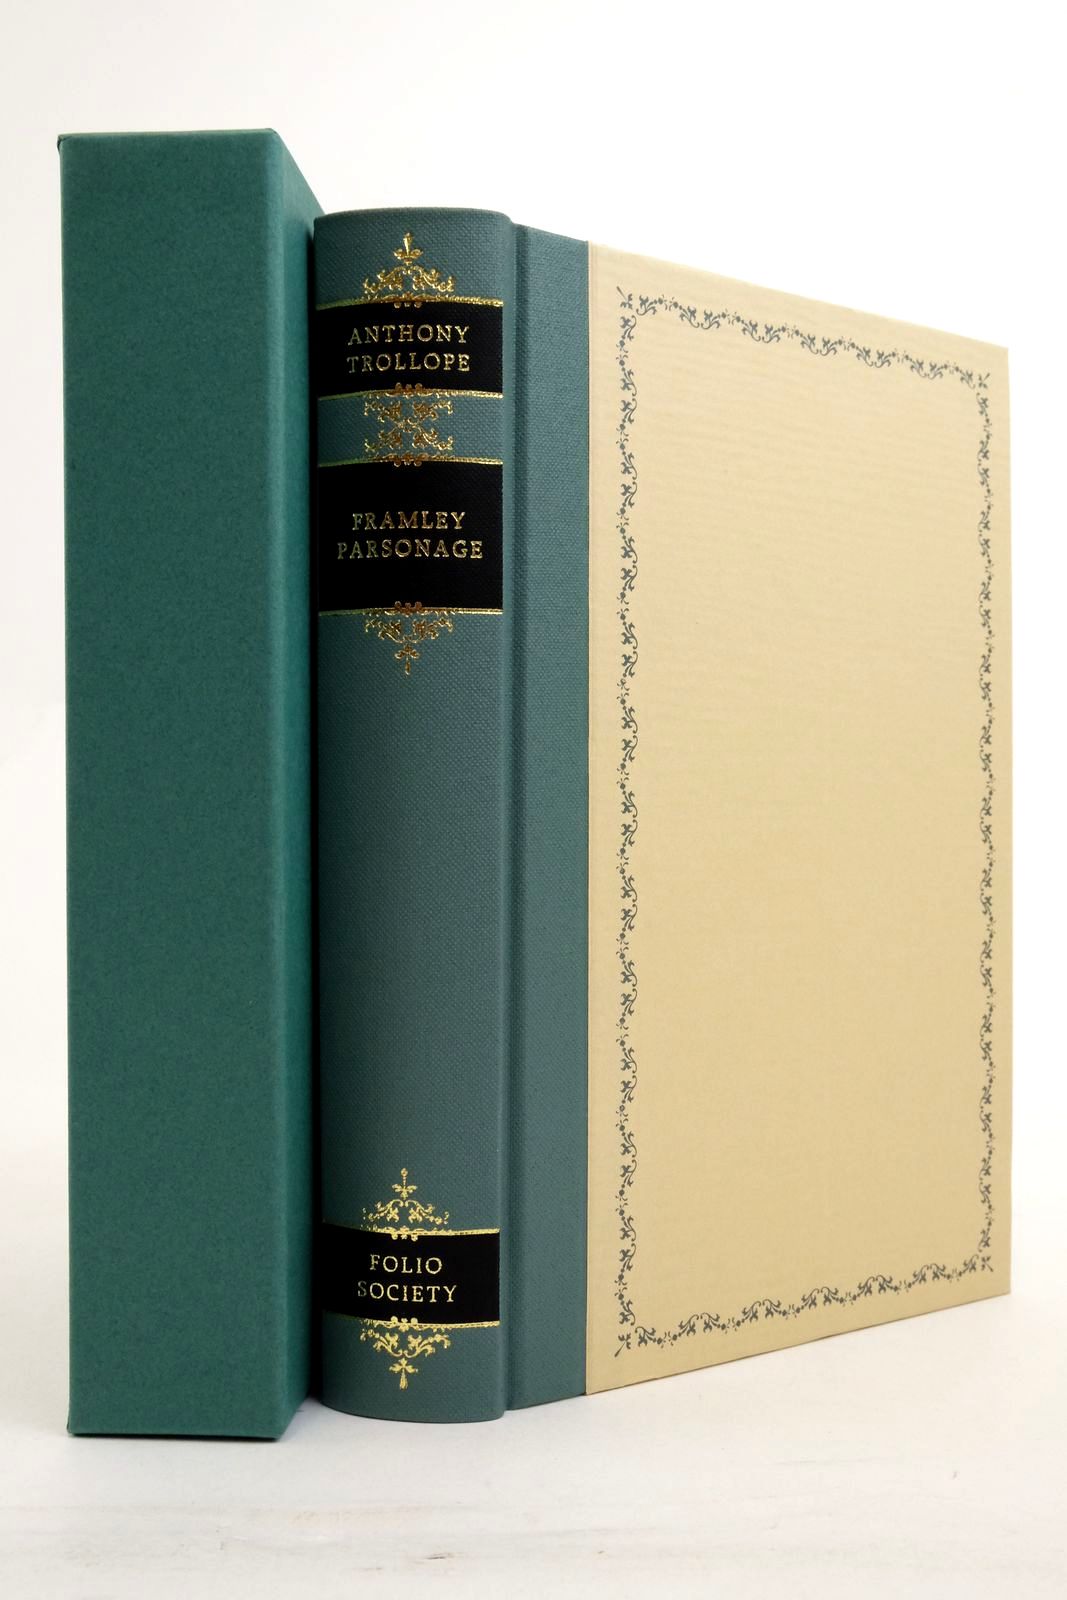 Photo of FRAMLEY PARSONAGE written by Trollope, Anthony Fraser, Antonia illustrated by Pendle, Alexy published by Folio Society (STOCK CODE: 2138232)  for sale by Stella & Rose's Books